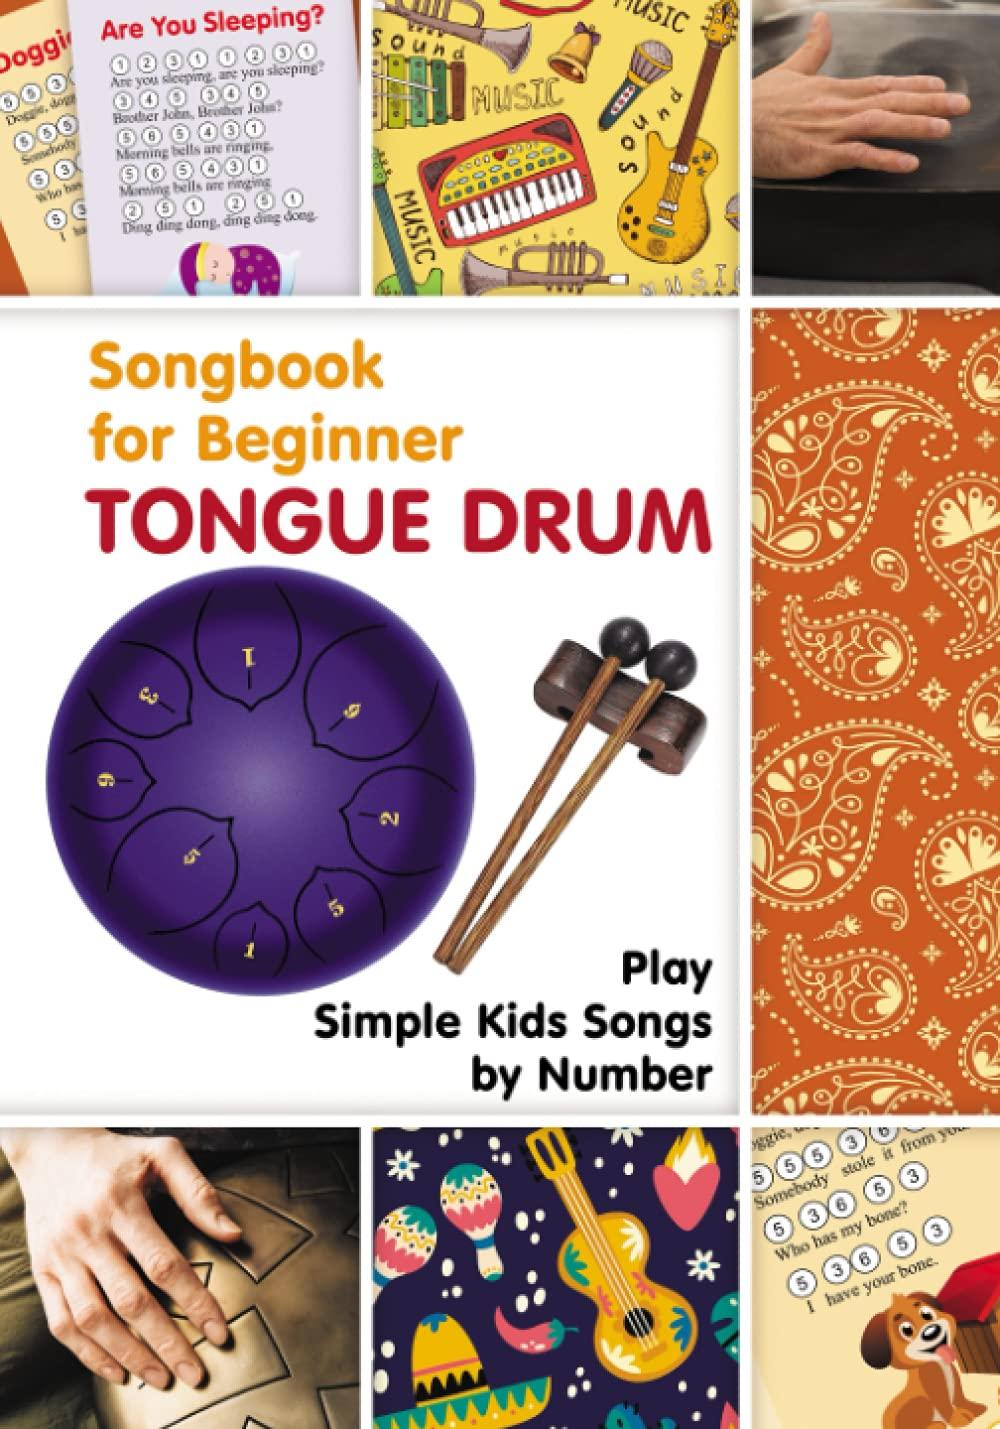 Always wanted to play music? Try the tongue drum